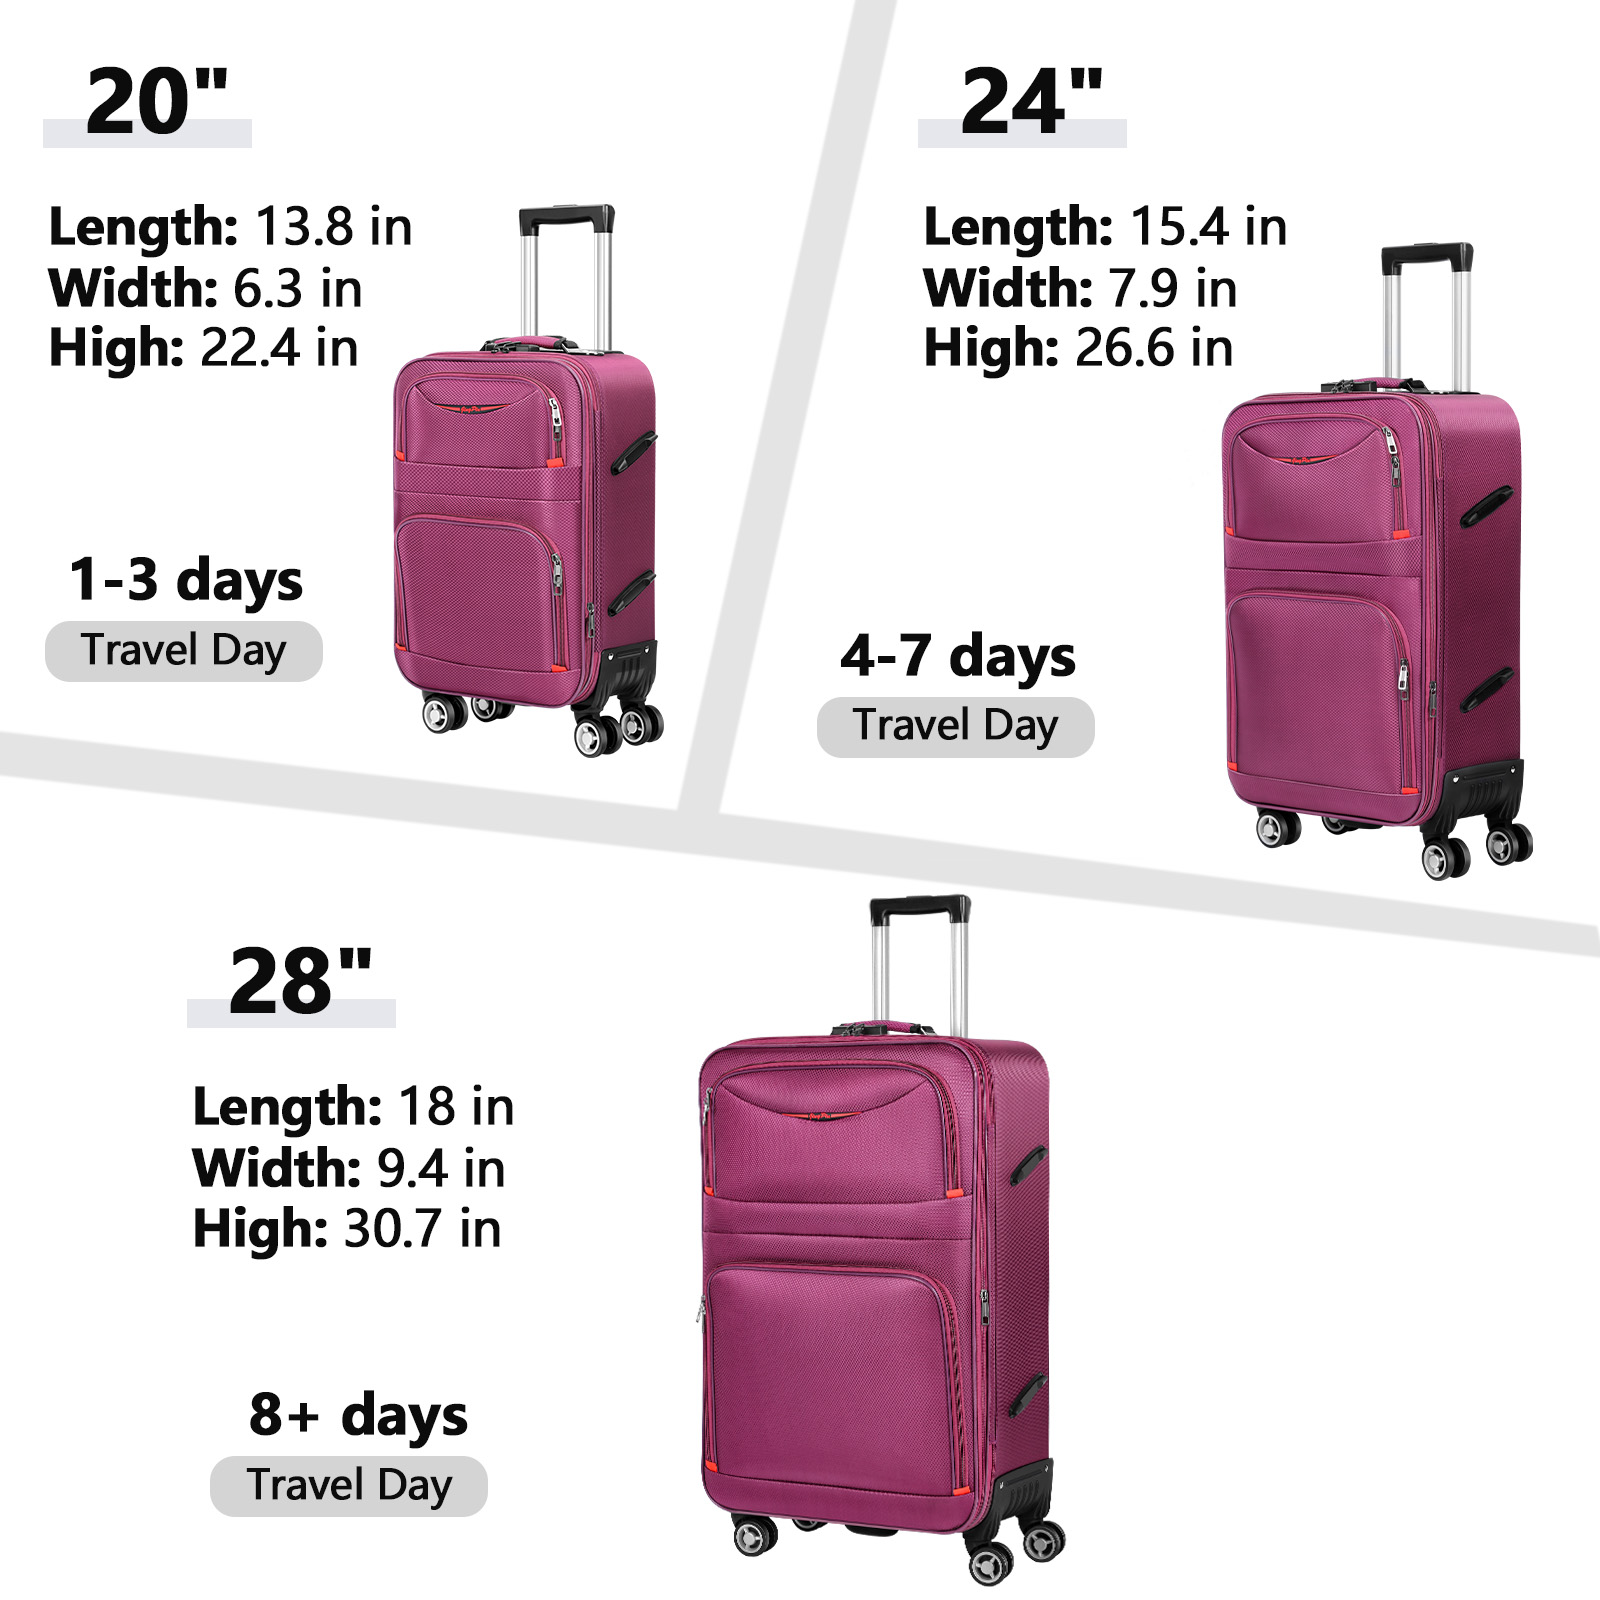 Hikolayae Jingpin Collection Softside Spinner Luggage Sets in Cute Pink ...